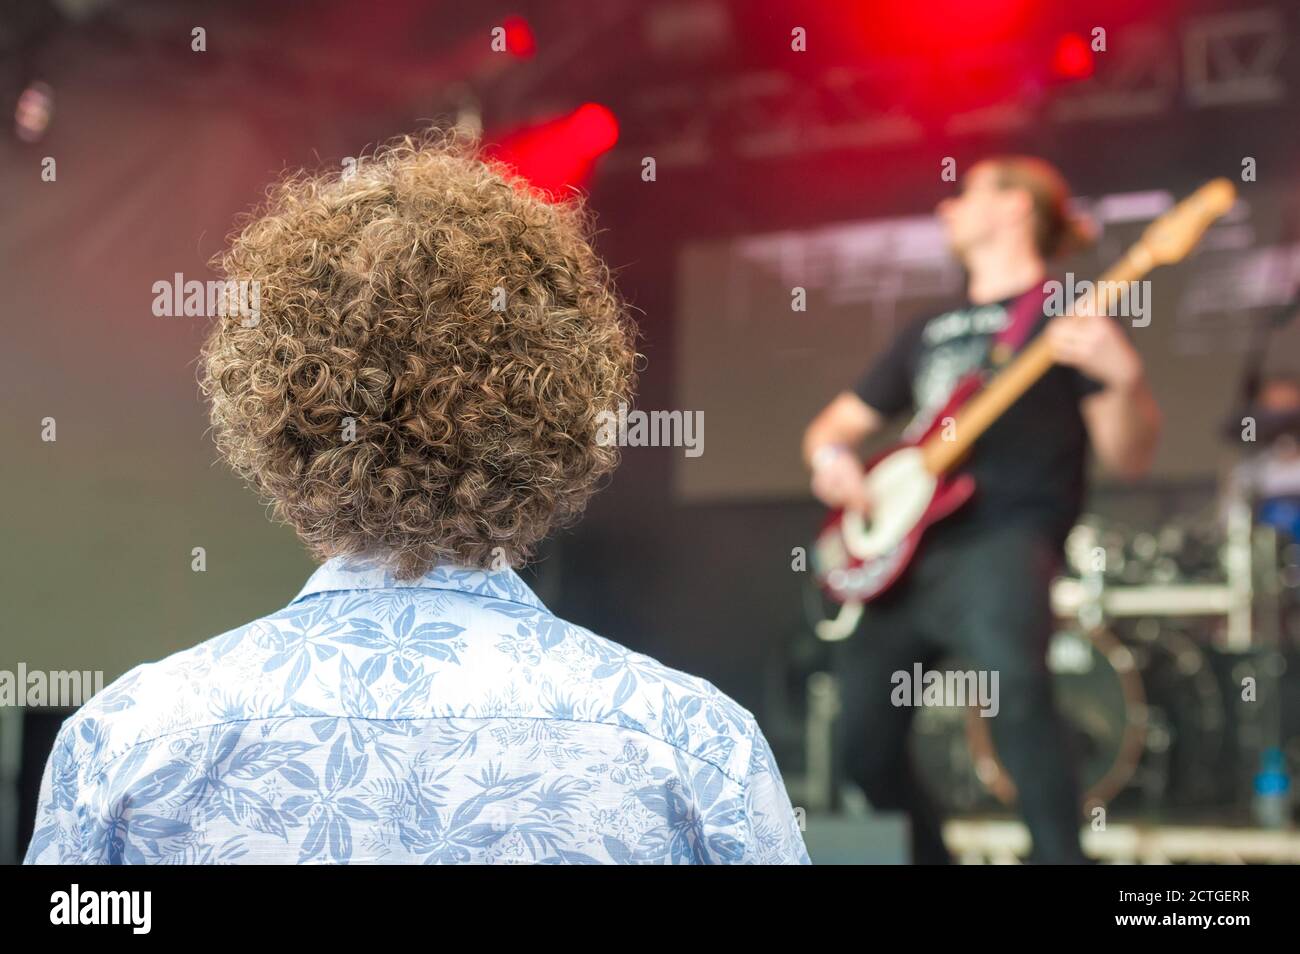 young person with very curly hair watching a rock band on stage Stock Photo